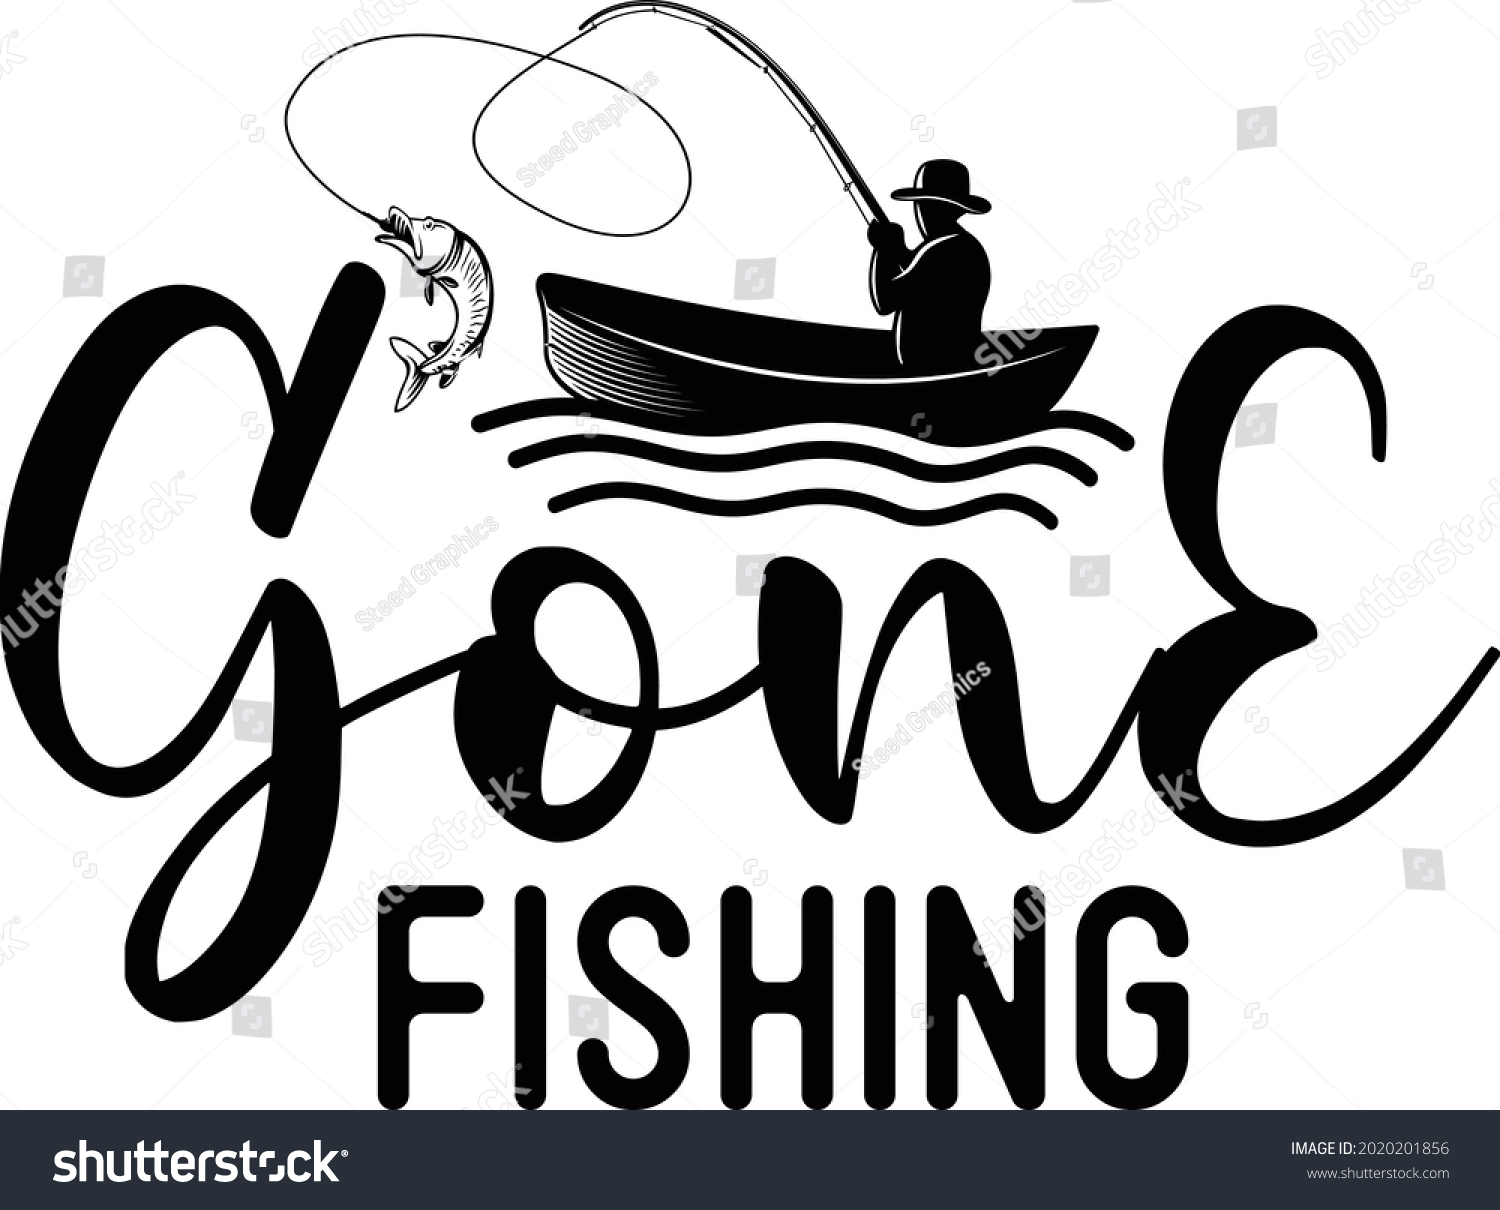 SVG of creative and unique fishing svg design svg